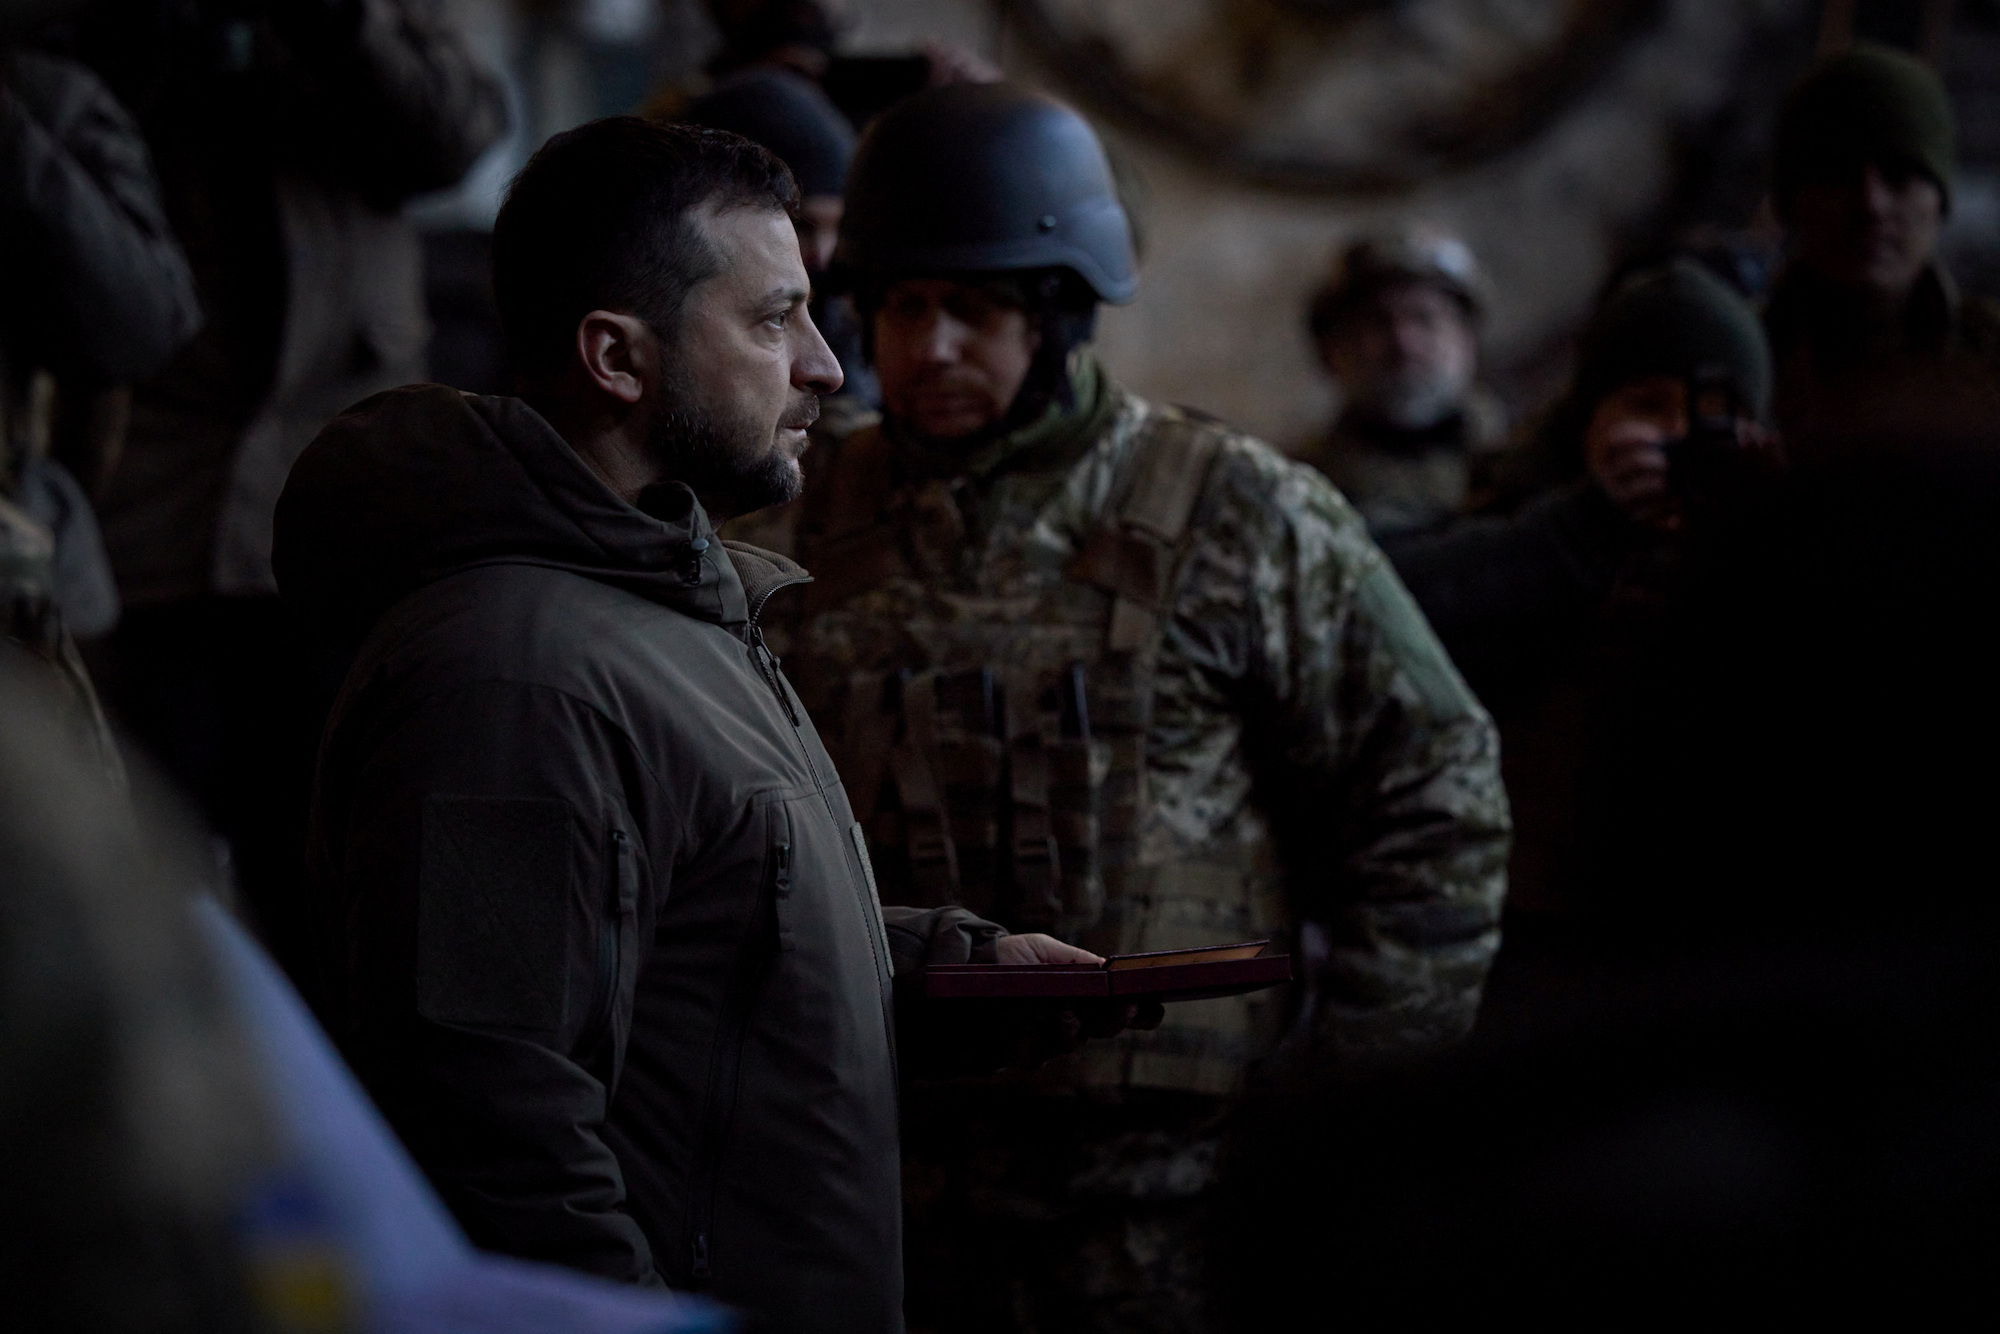 President Volodymyr Zelensky attends an award ceremony on Tuesday for Ukrainian service members at their position in the frontline town of Bakhmut, Donetsk region.